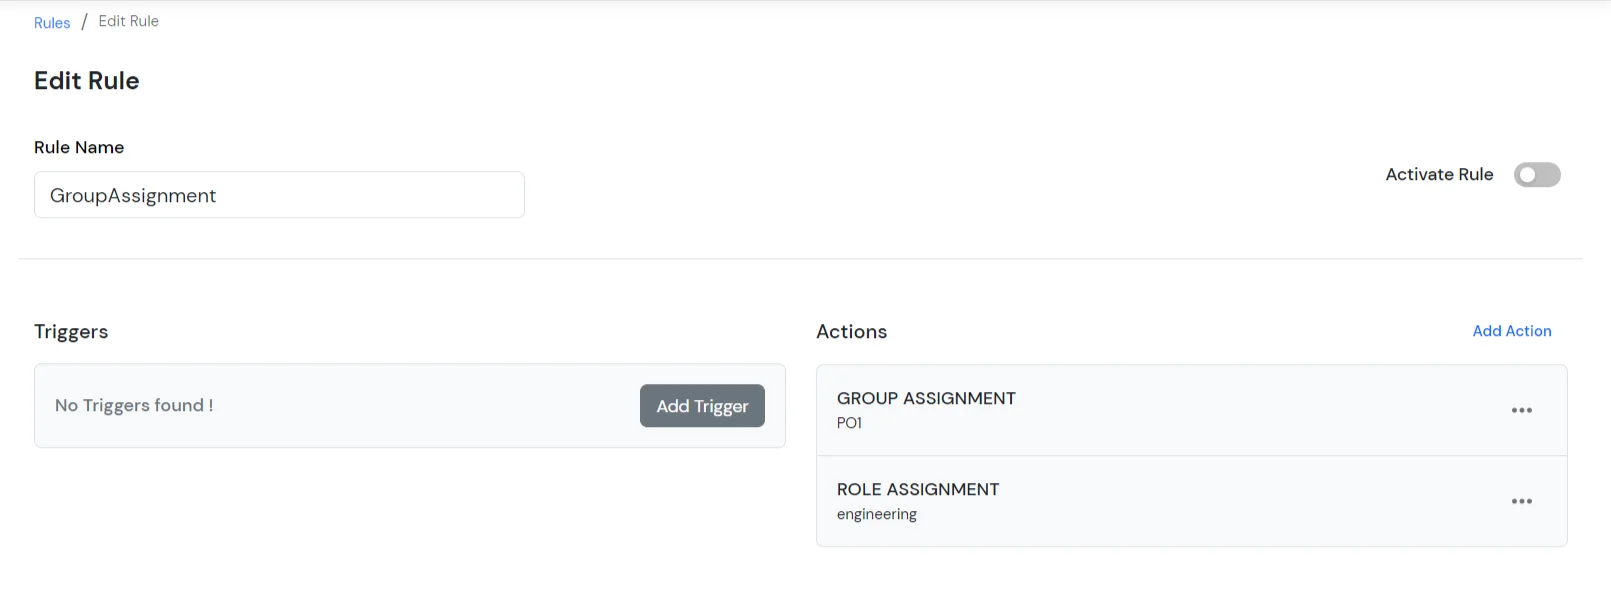 Rule-Based Automation/Provisioning : In Actions, select group assignment and role assignment